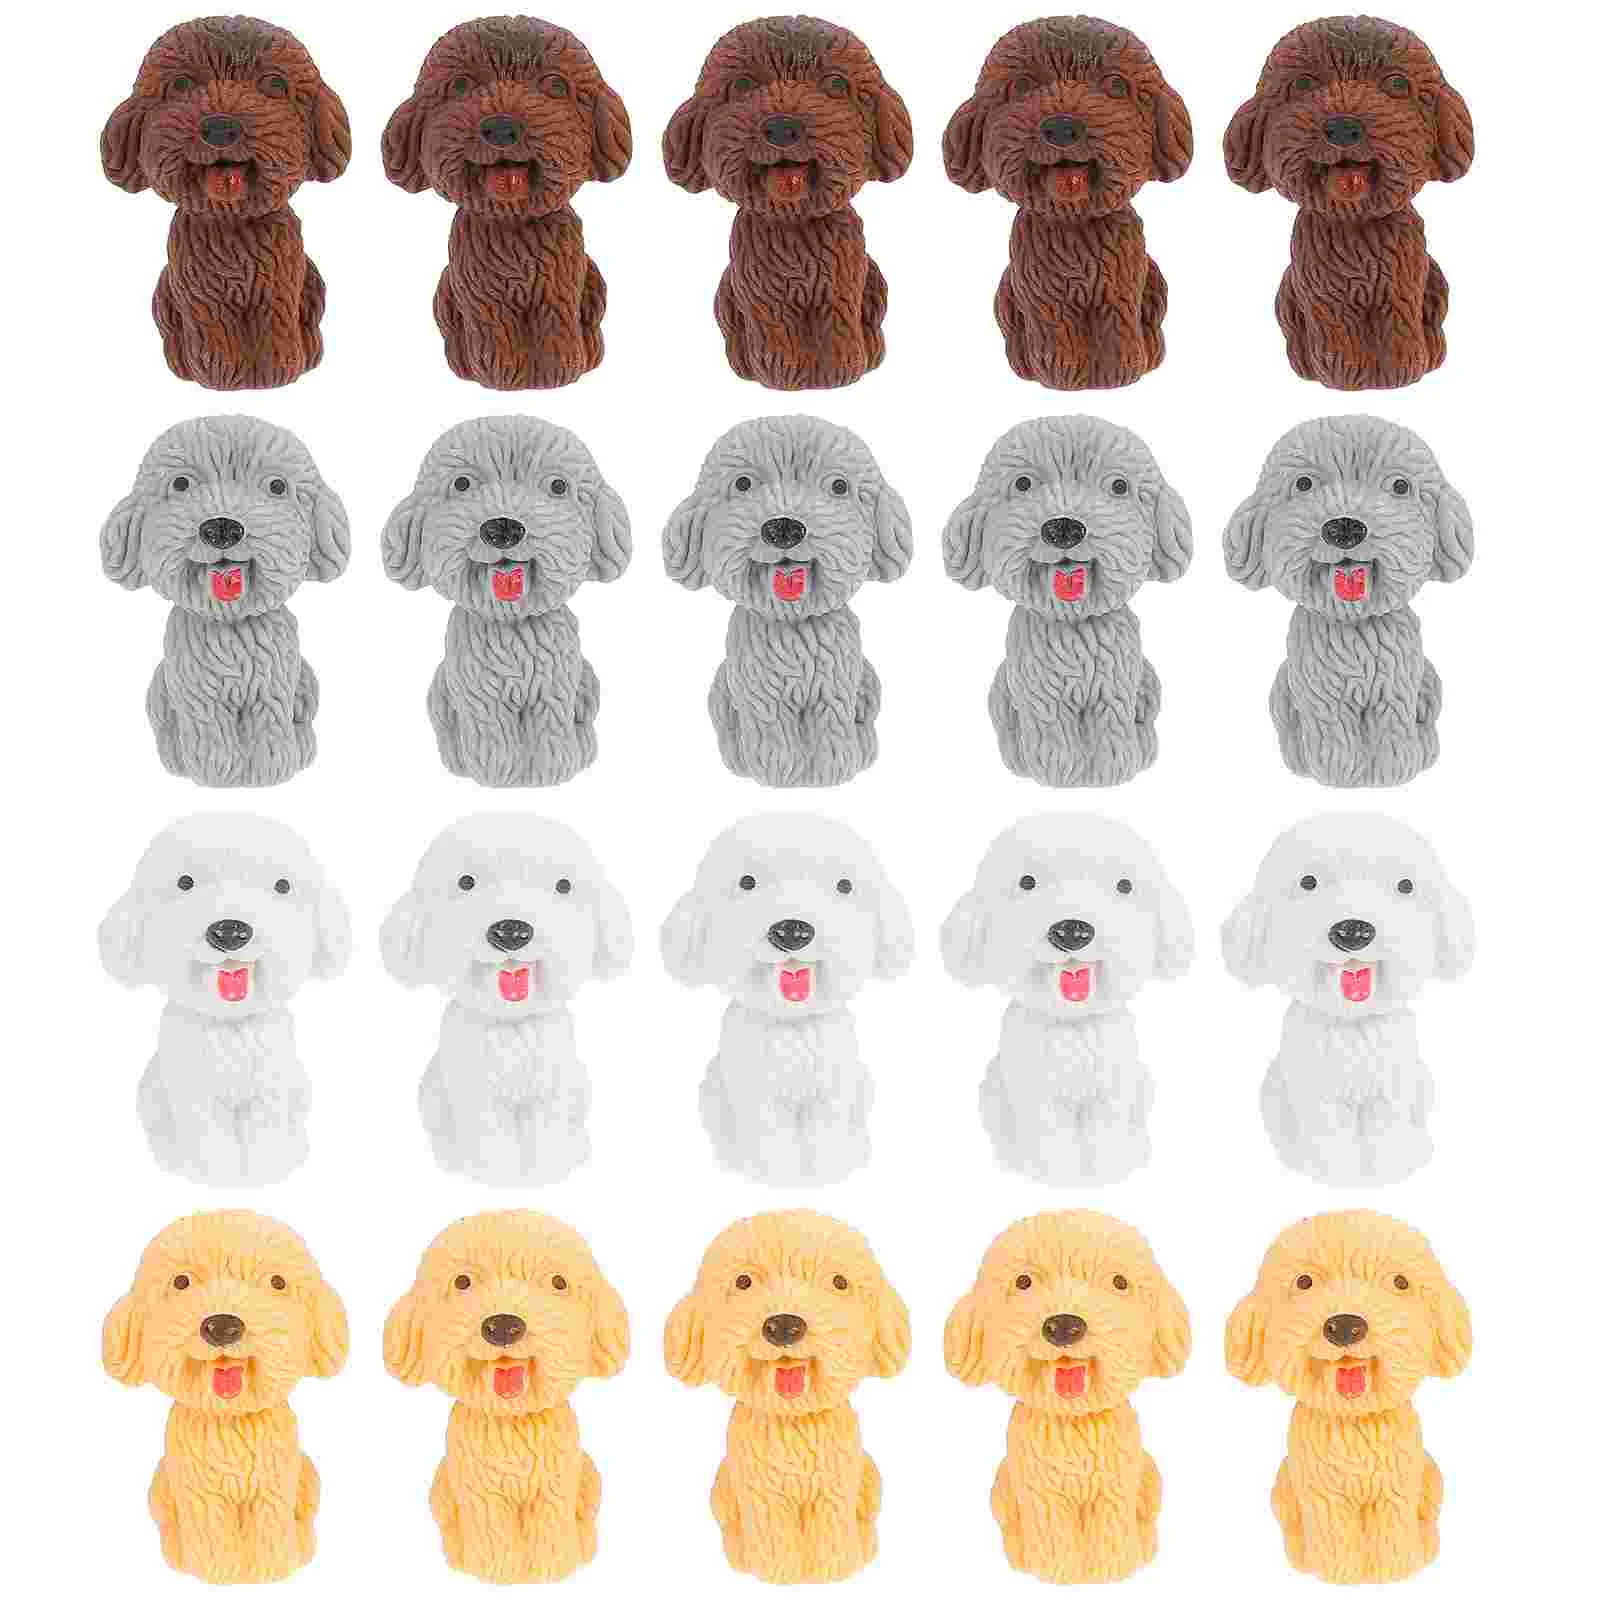 

Poodle Erasers: Dogs Shaped Erasers Stationery Supplies for Kids Student 20pcs Rubber